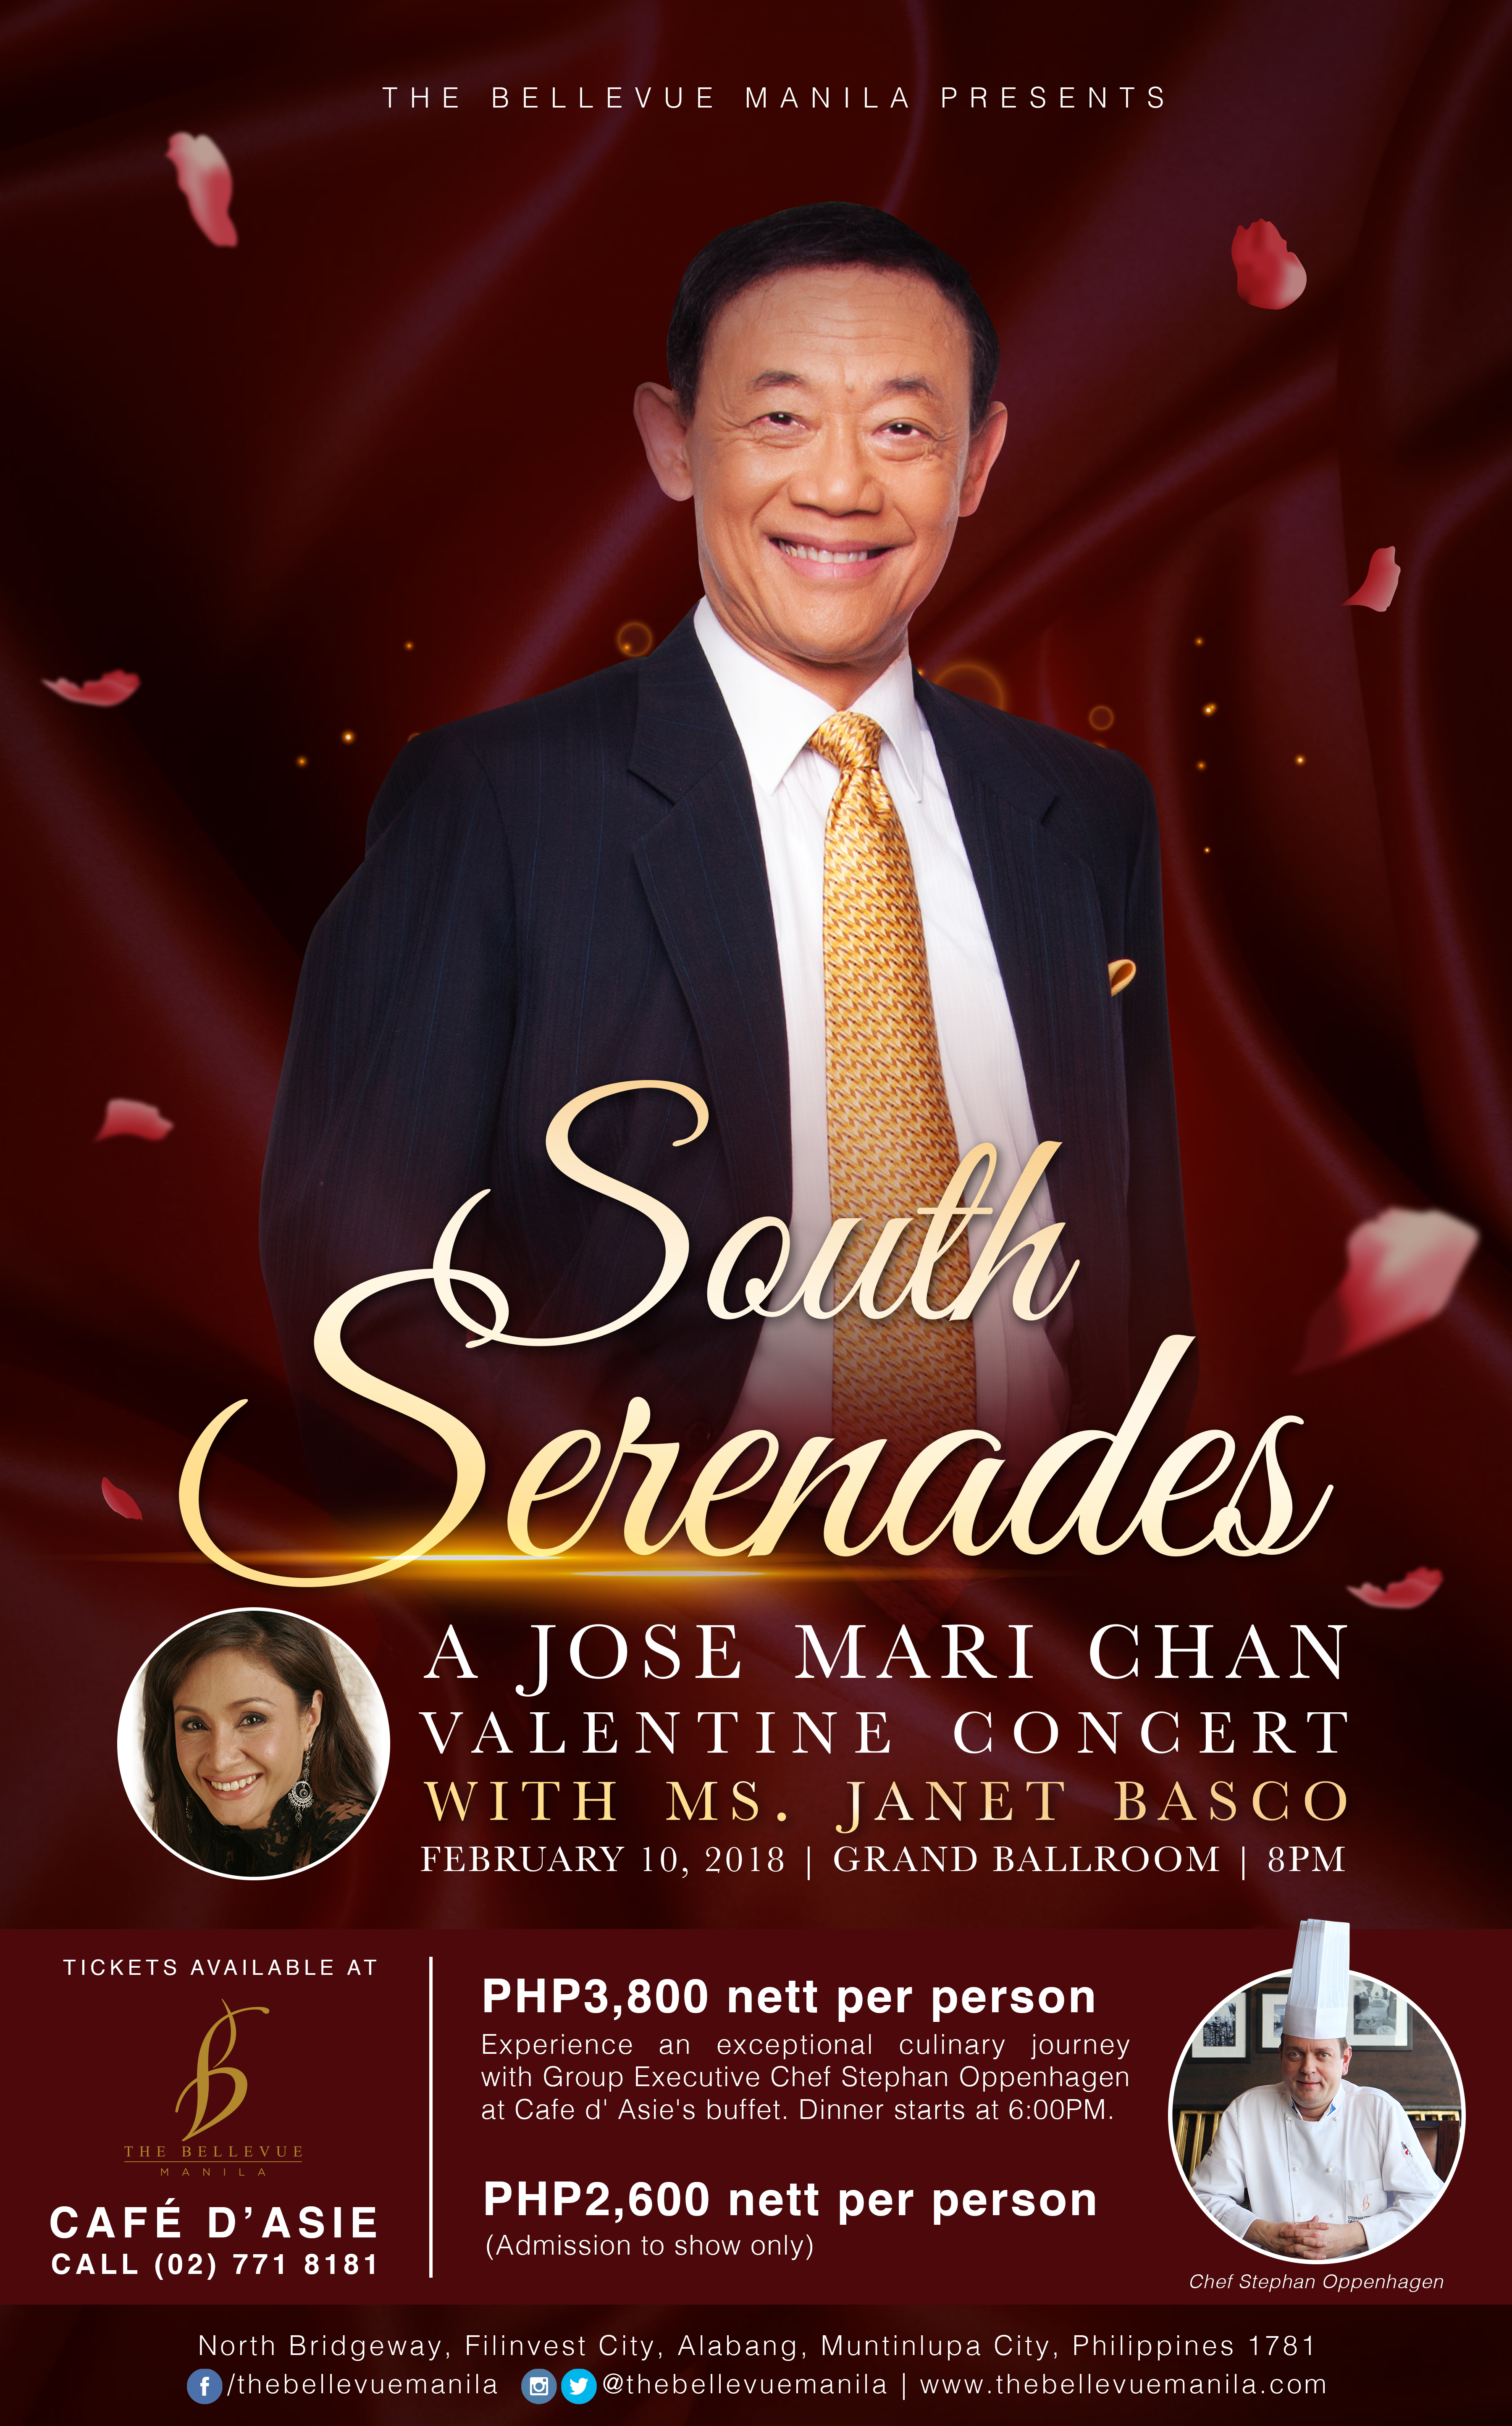 Jose Mari Chan will serenade the metro south with a Valentine’s concert